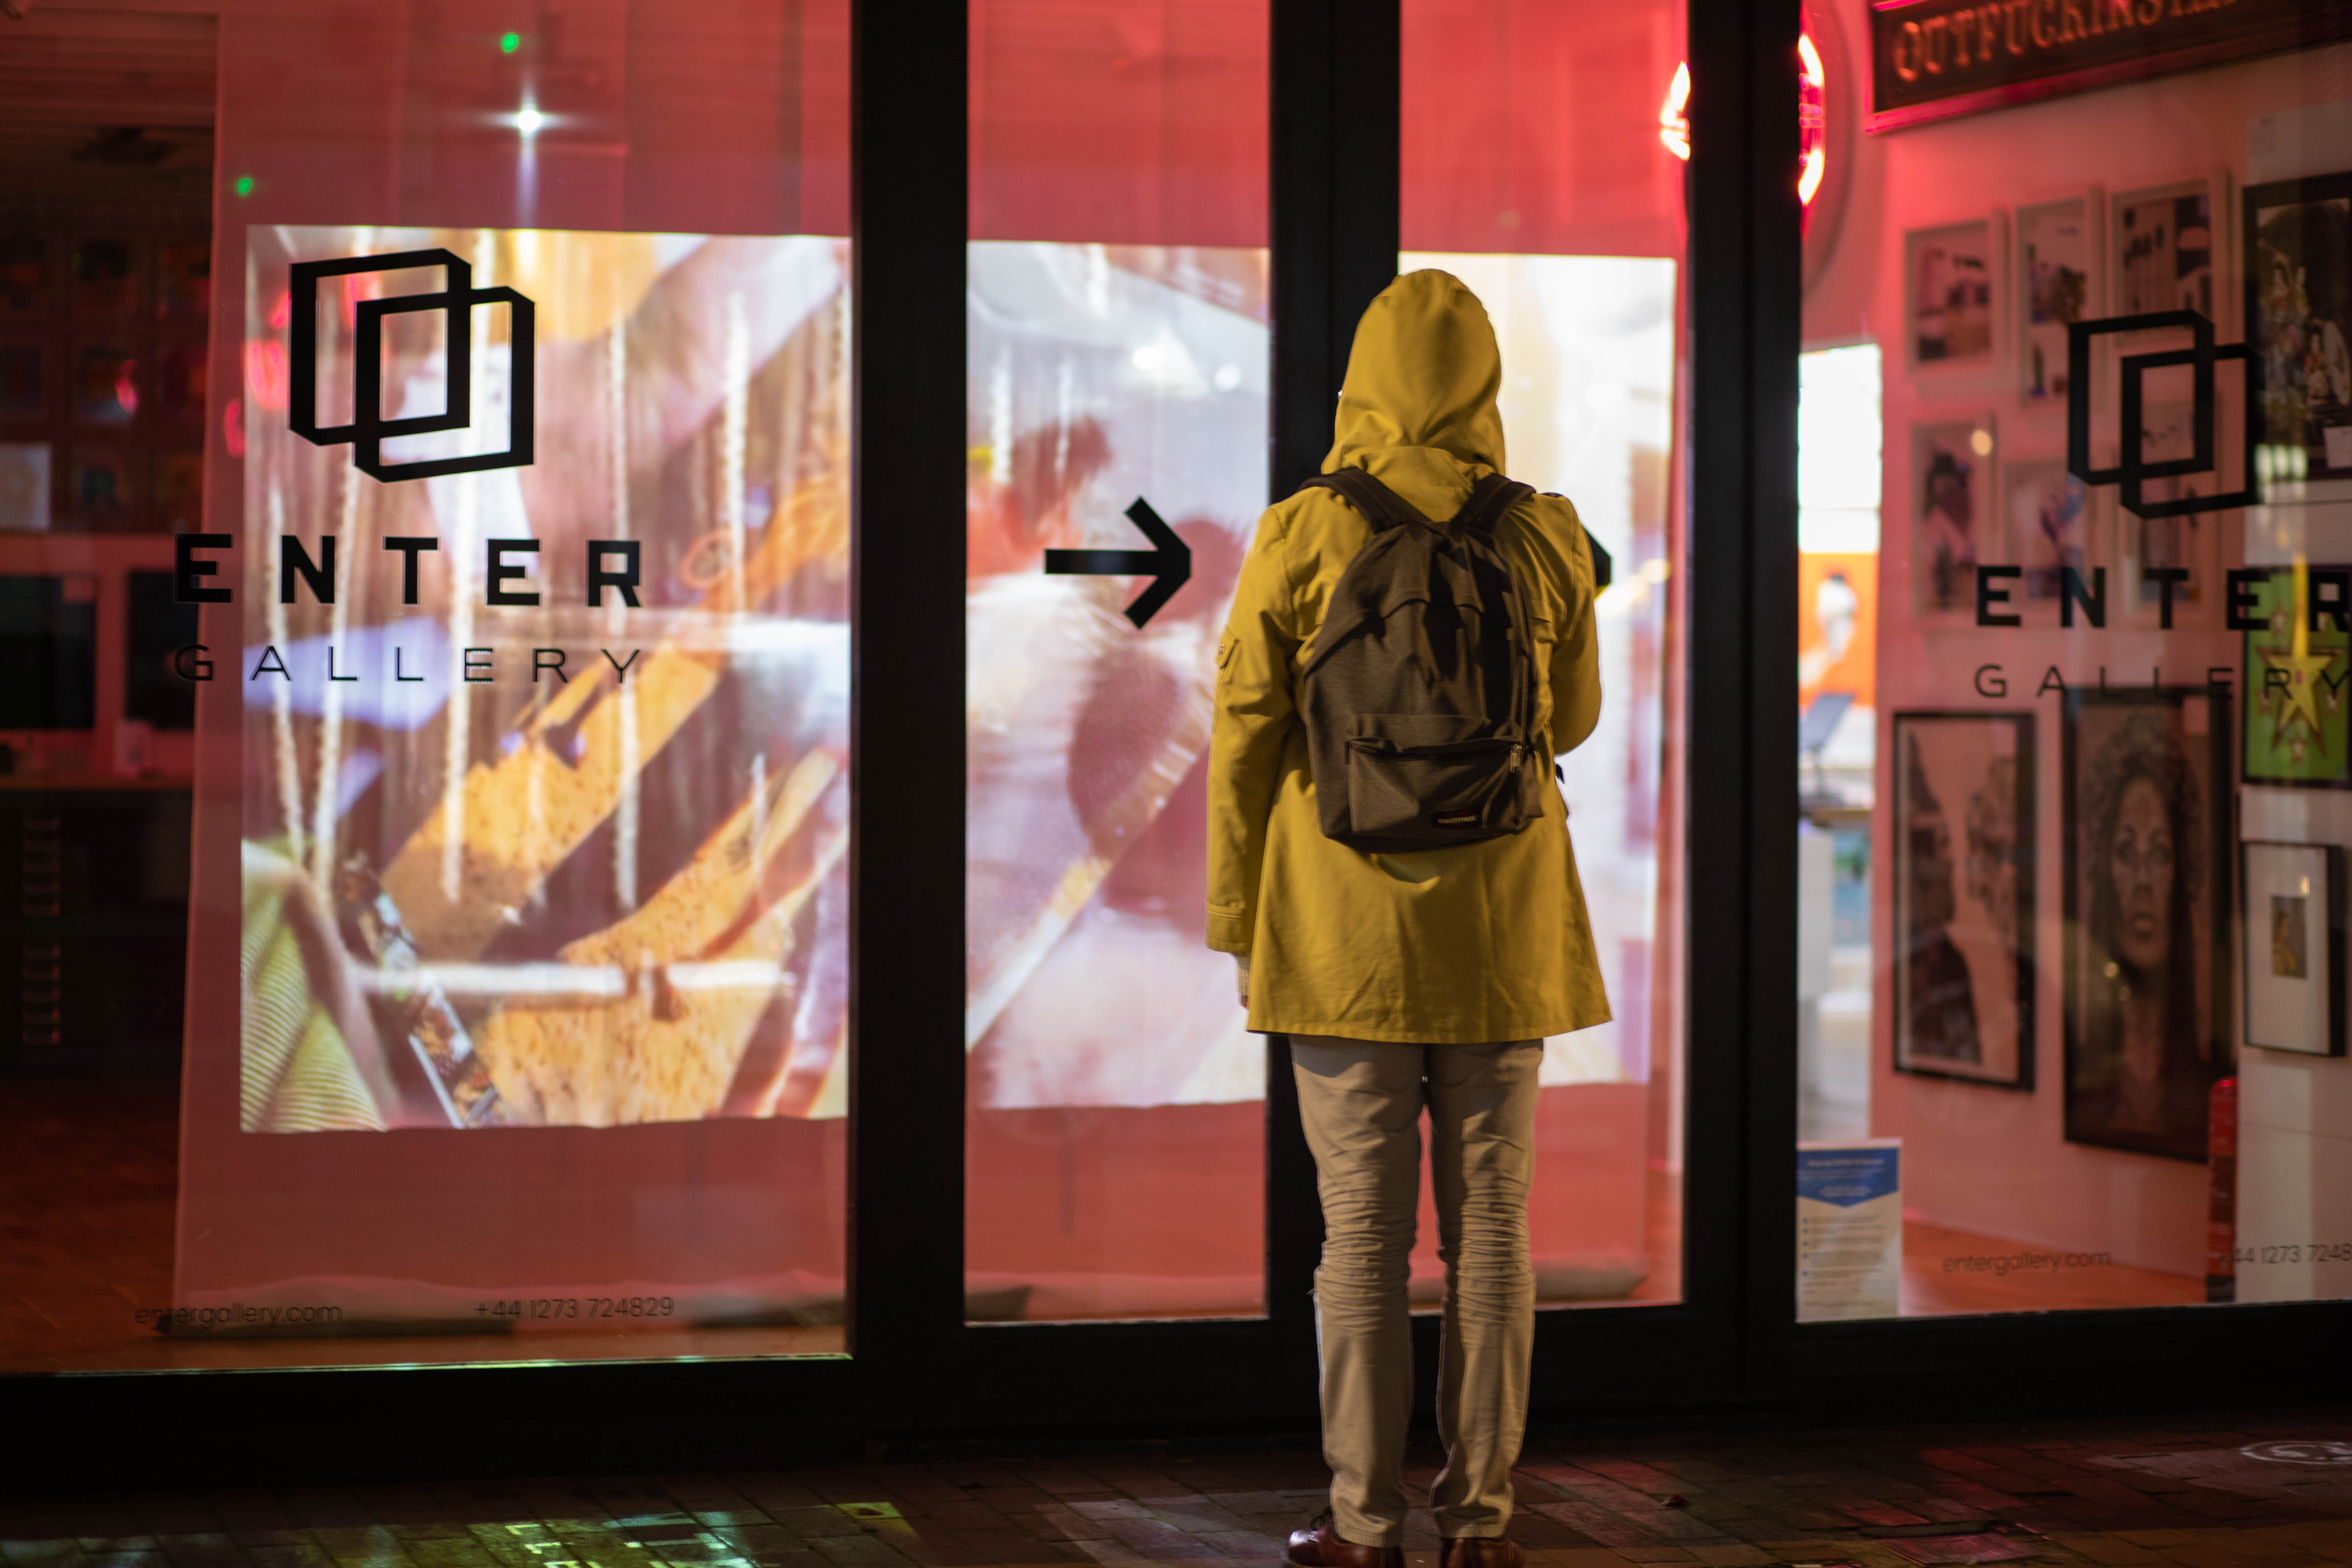 person wearing yellow coat and a back pack, standing in front of a gallery window showing a projected screen behind the glass. Text on window says 'Enter Gallery' with an arrow pointing to the right.